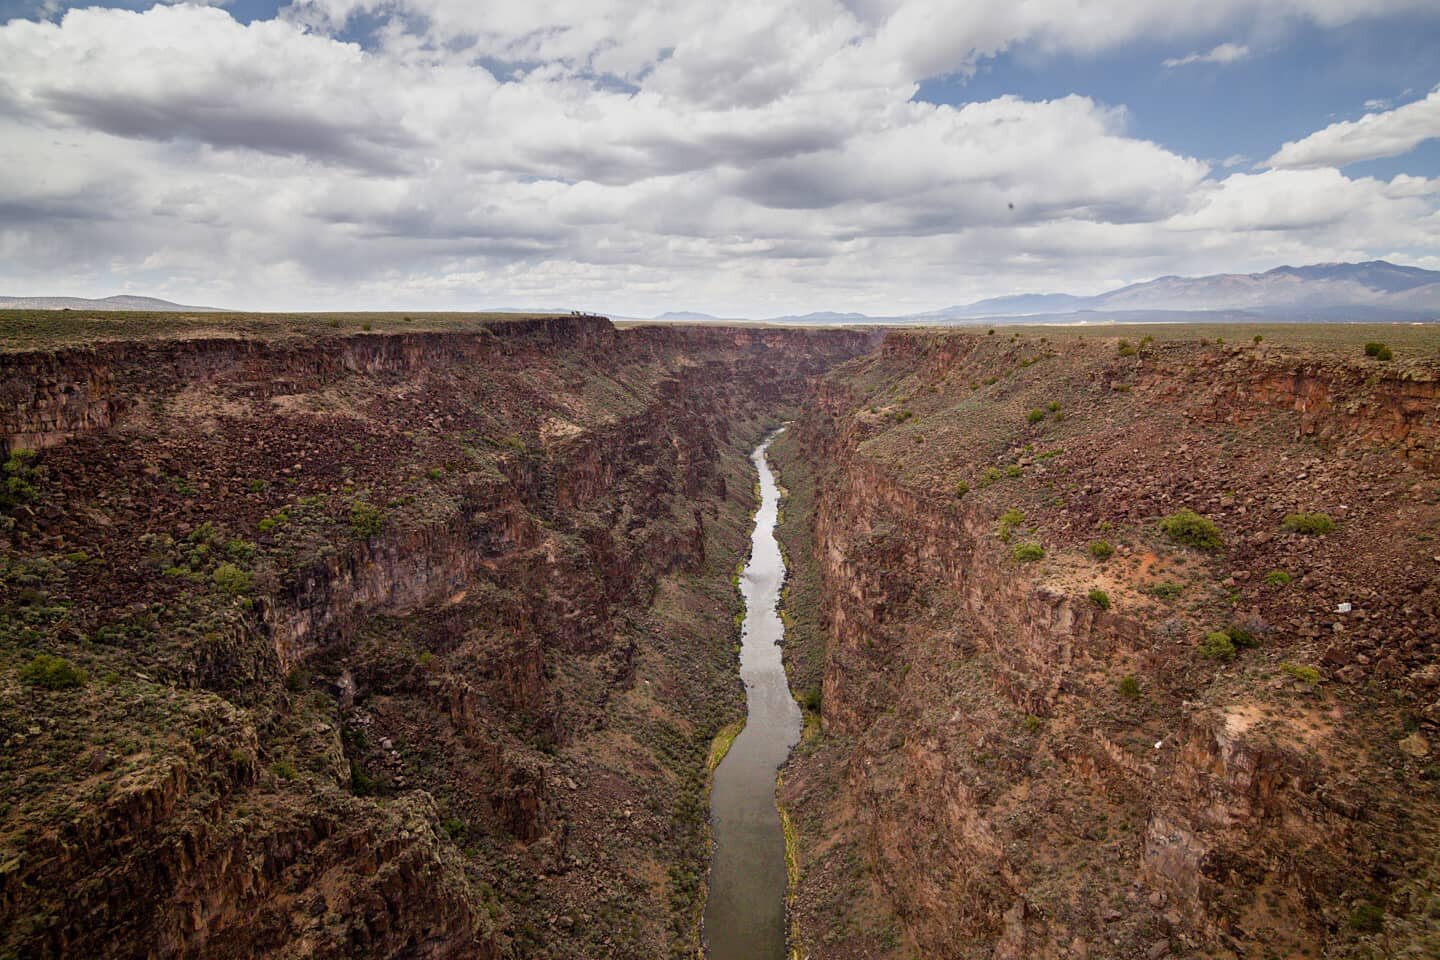 The Rio Grande has cut deep. The view from the Rio Grande Gorge Bridge overlooks this jagged canyon, leading the water to a vanishing point somewhere near the horizon.